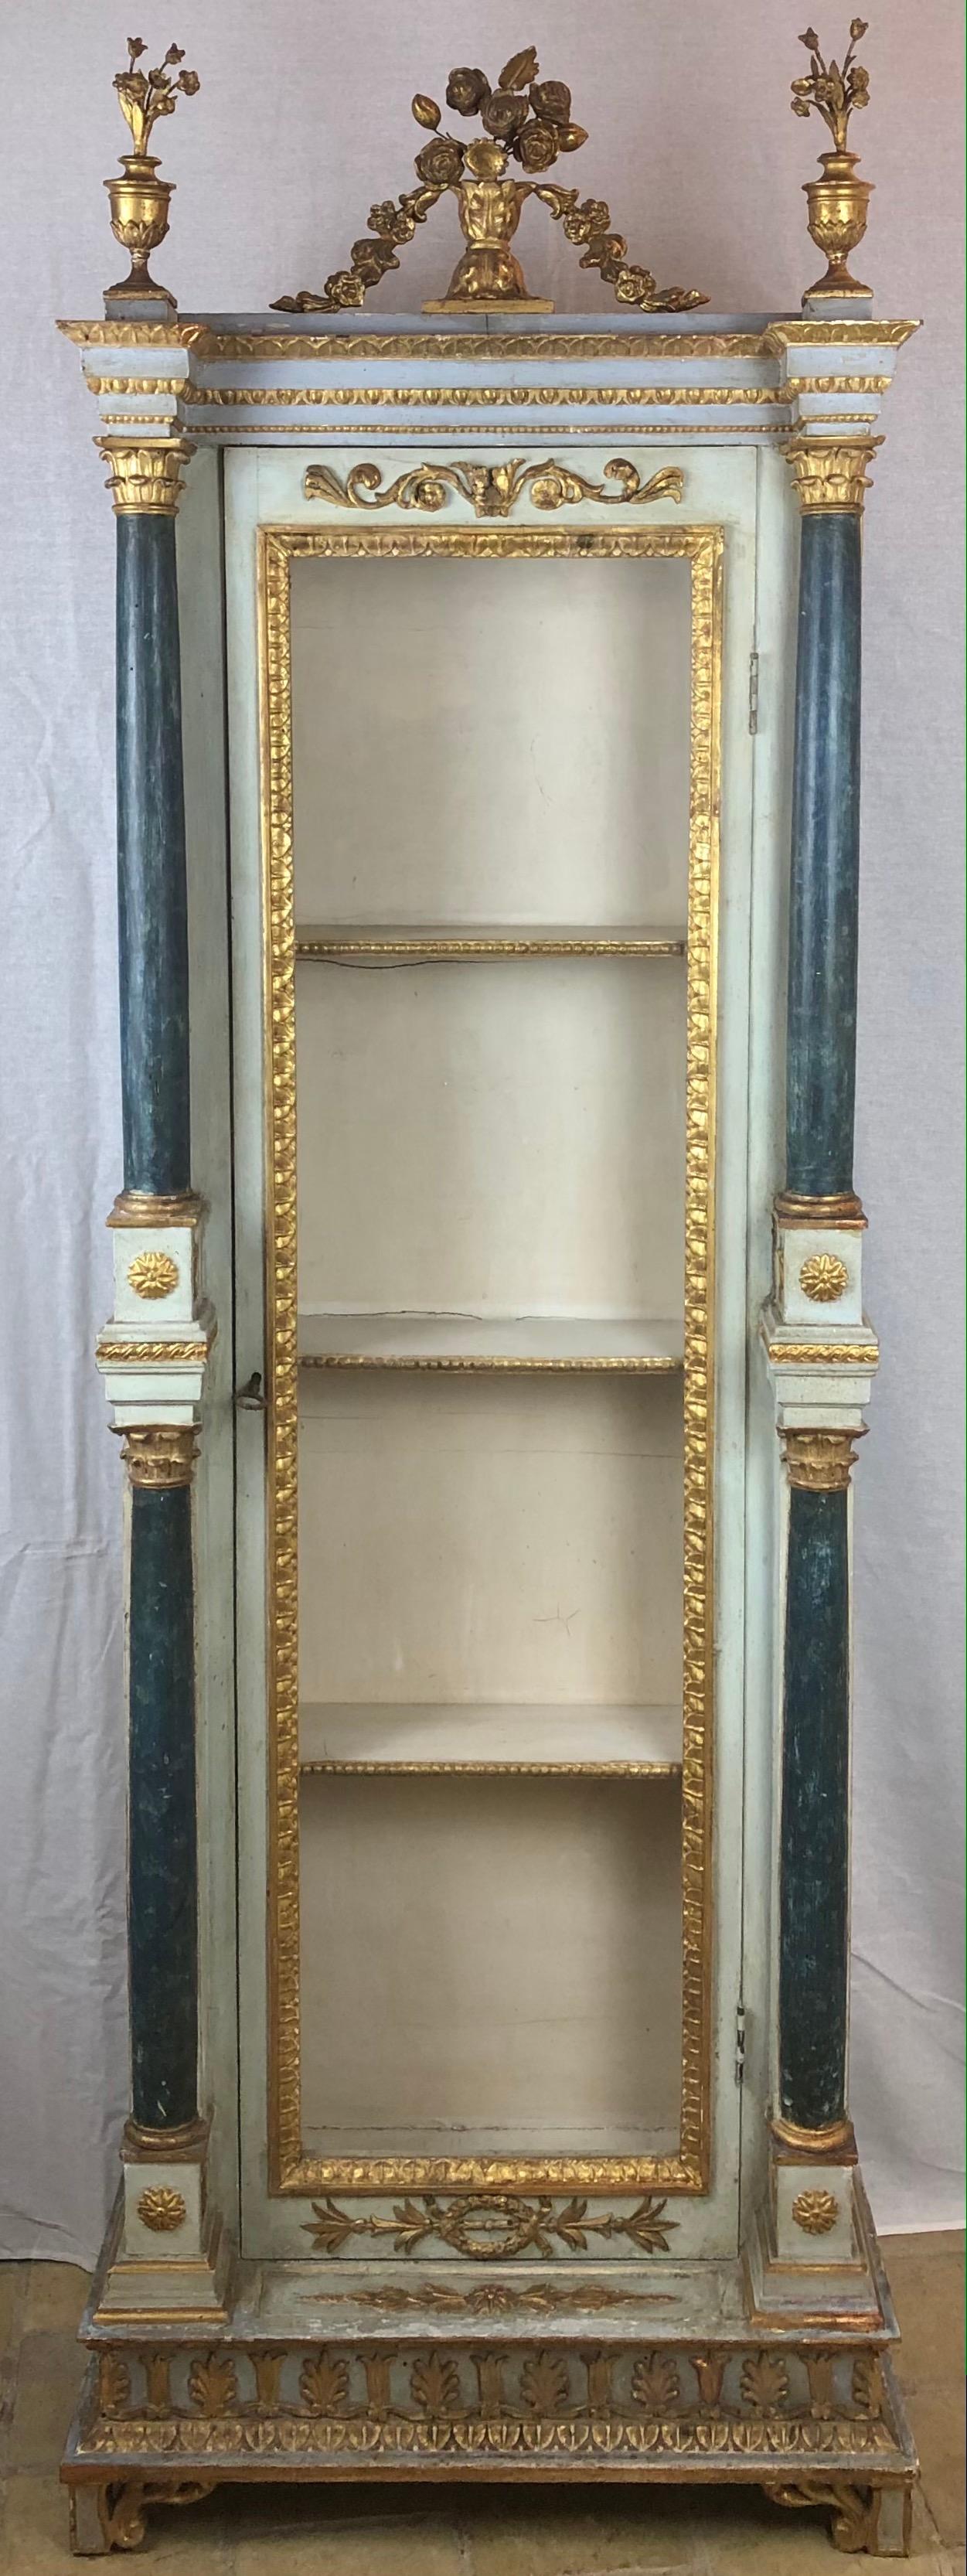 Late 18th-Early 19th Century Carved Painted and Gilt Wood Venetian Cabinet For Sale 3